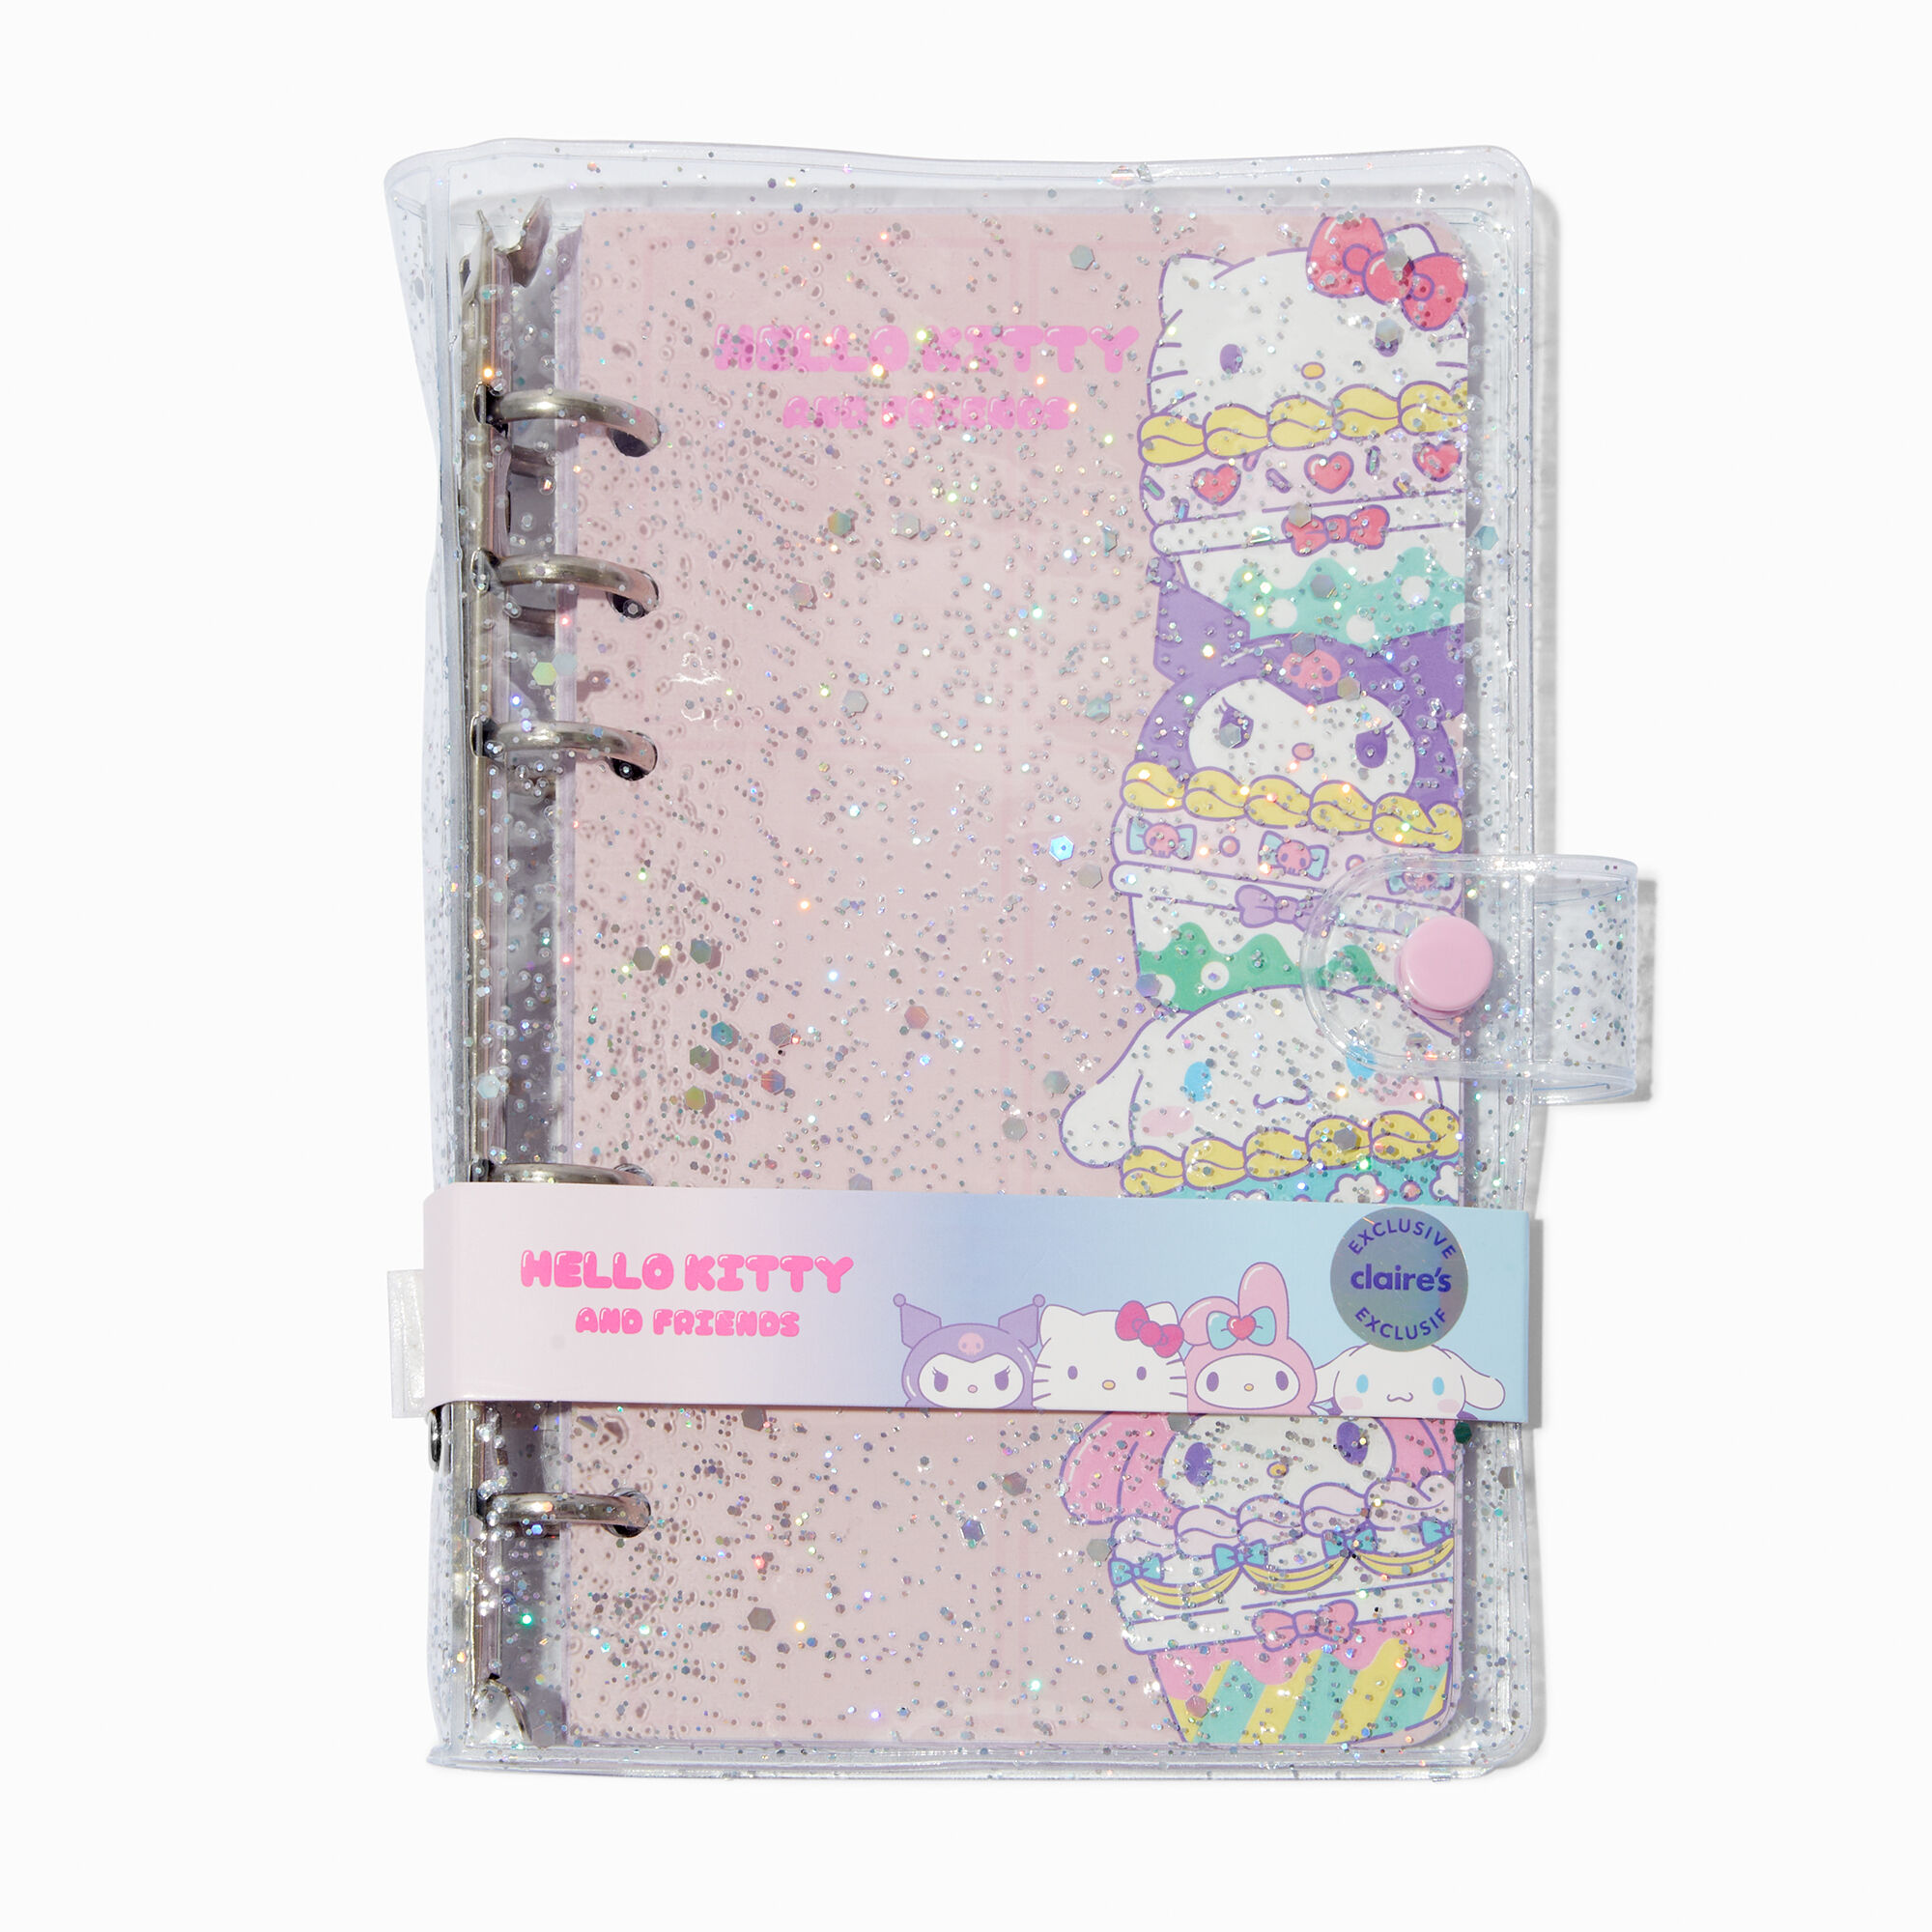 View Hello Kitty And Friends Claires Exclusive Planner information